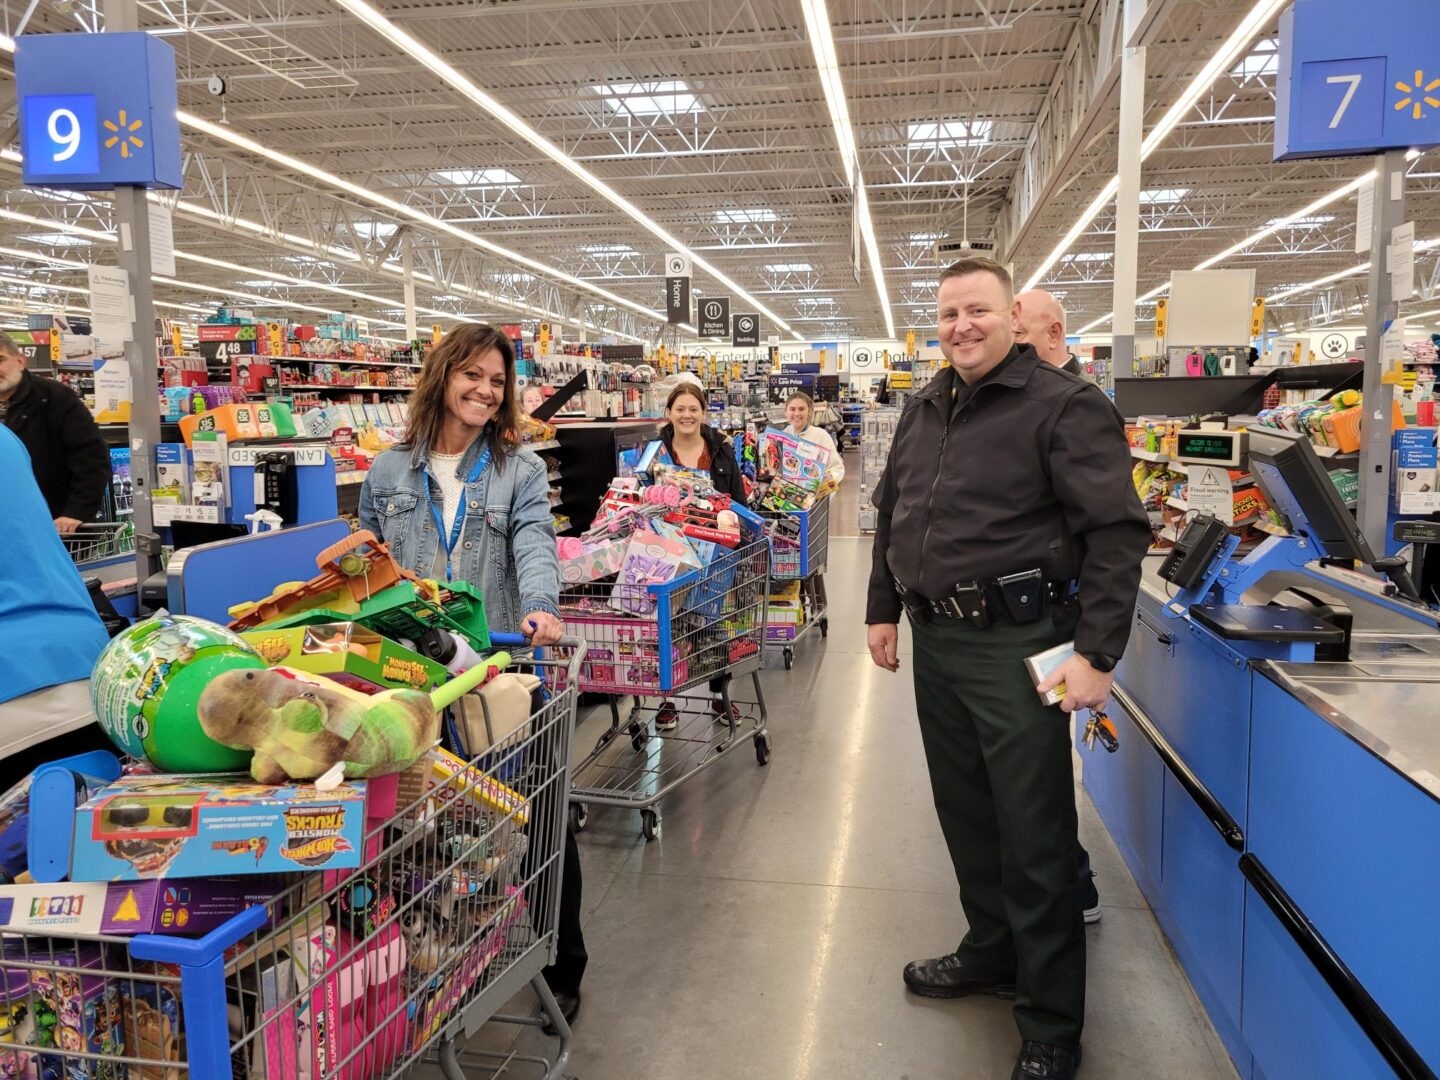 Three women lined up with shopping carts filled with bright colored toys and children's items smile next to a smiling police officer wearing black. The group is in a brightly lit big store with checkout lane markers numbered 7 and 9. The markers are blue with white numbers and have a yellow star walmart logo. 